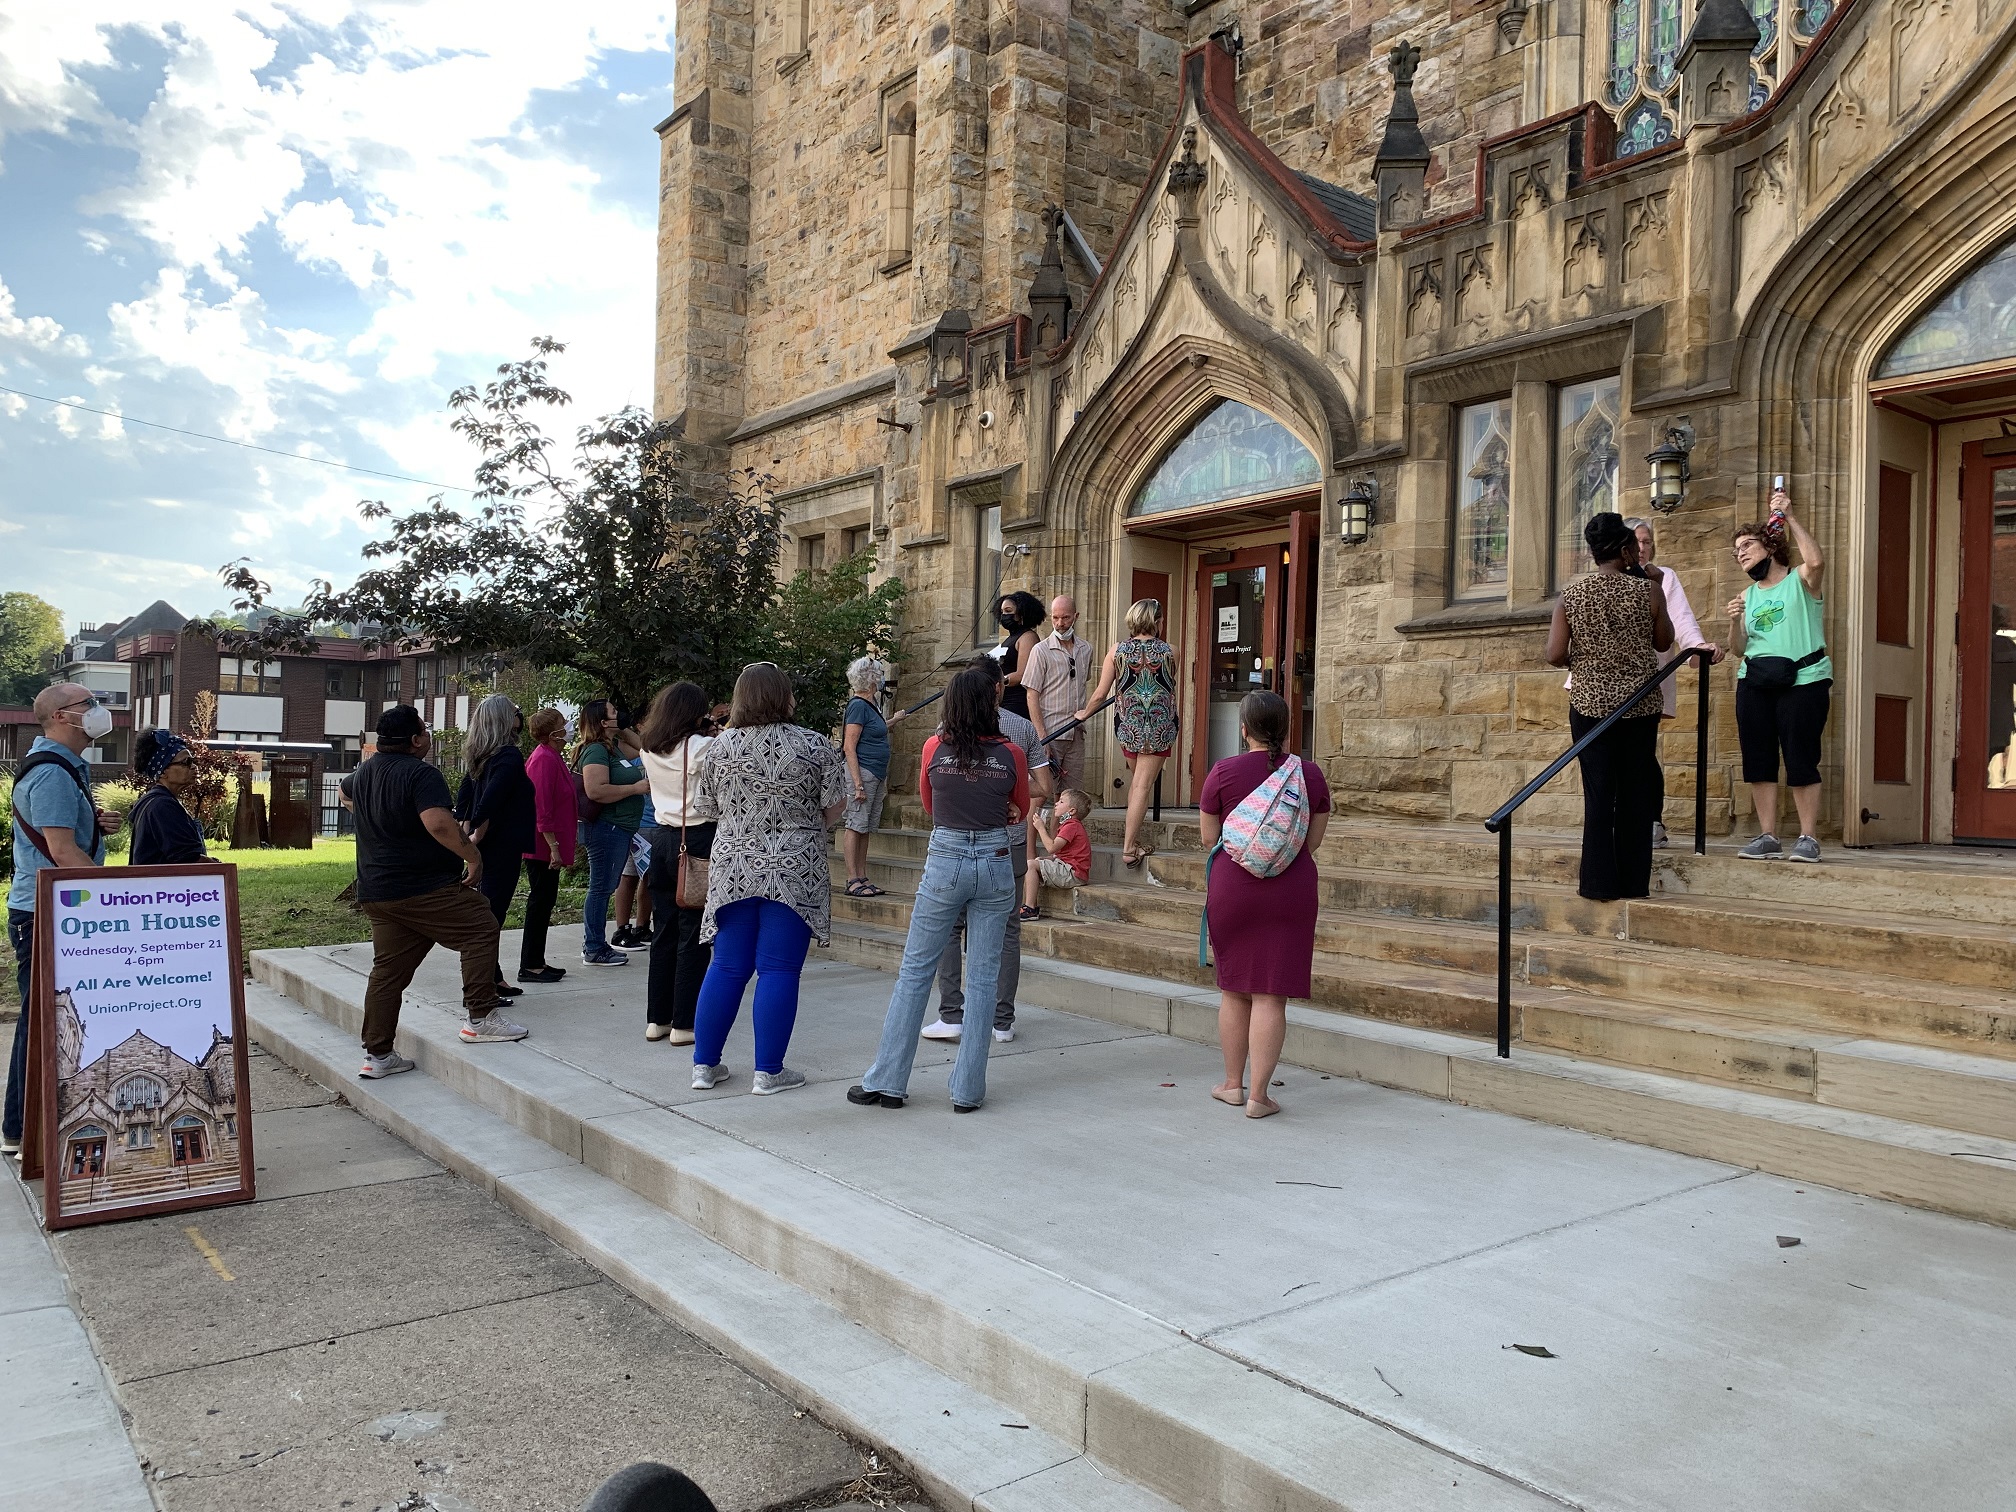 Group of people standing on a sidewalk and on steps in front of a large church building.